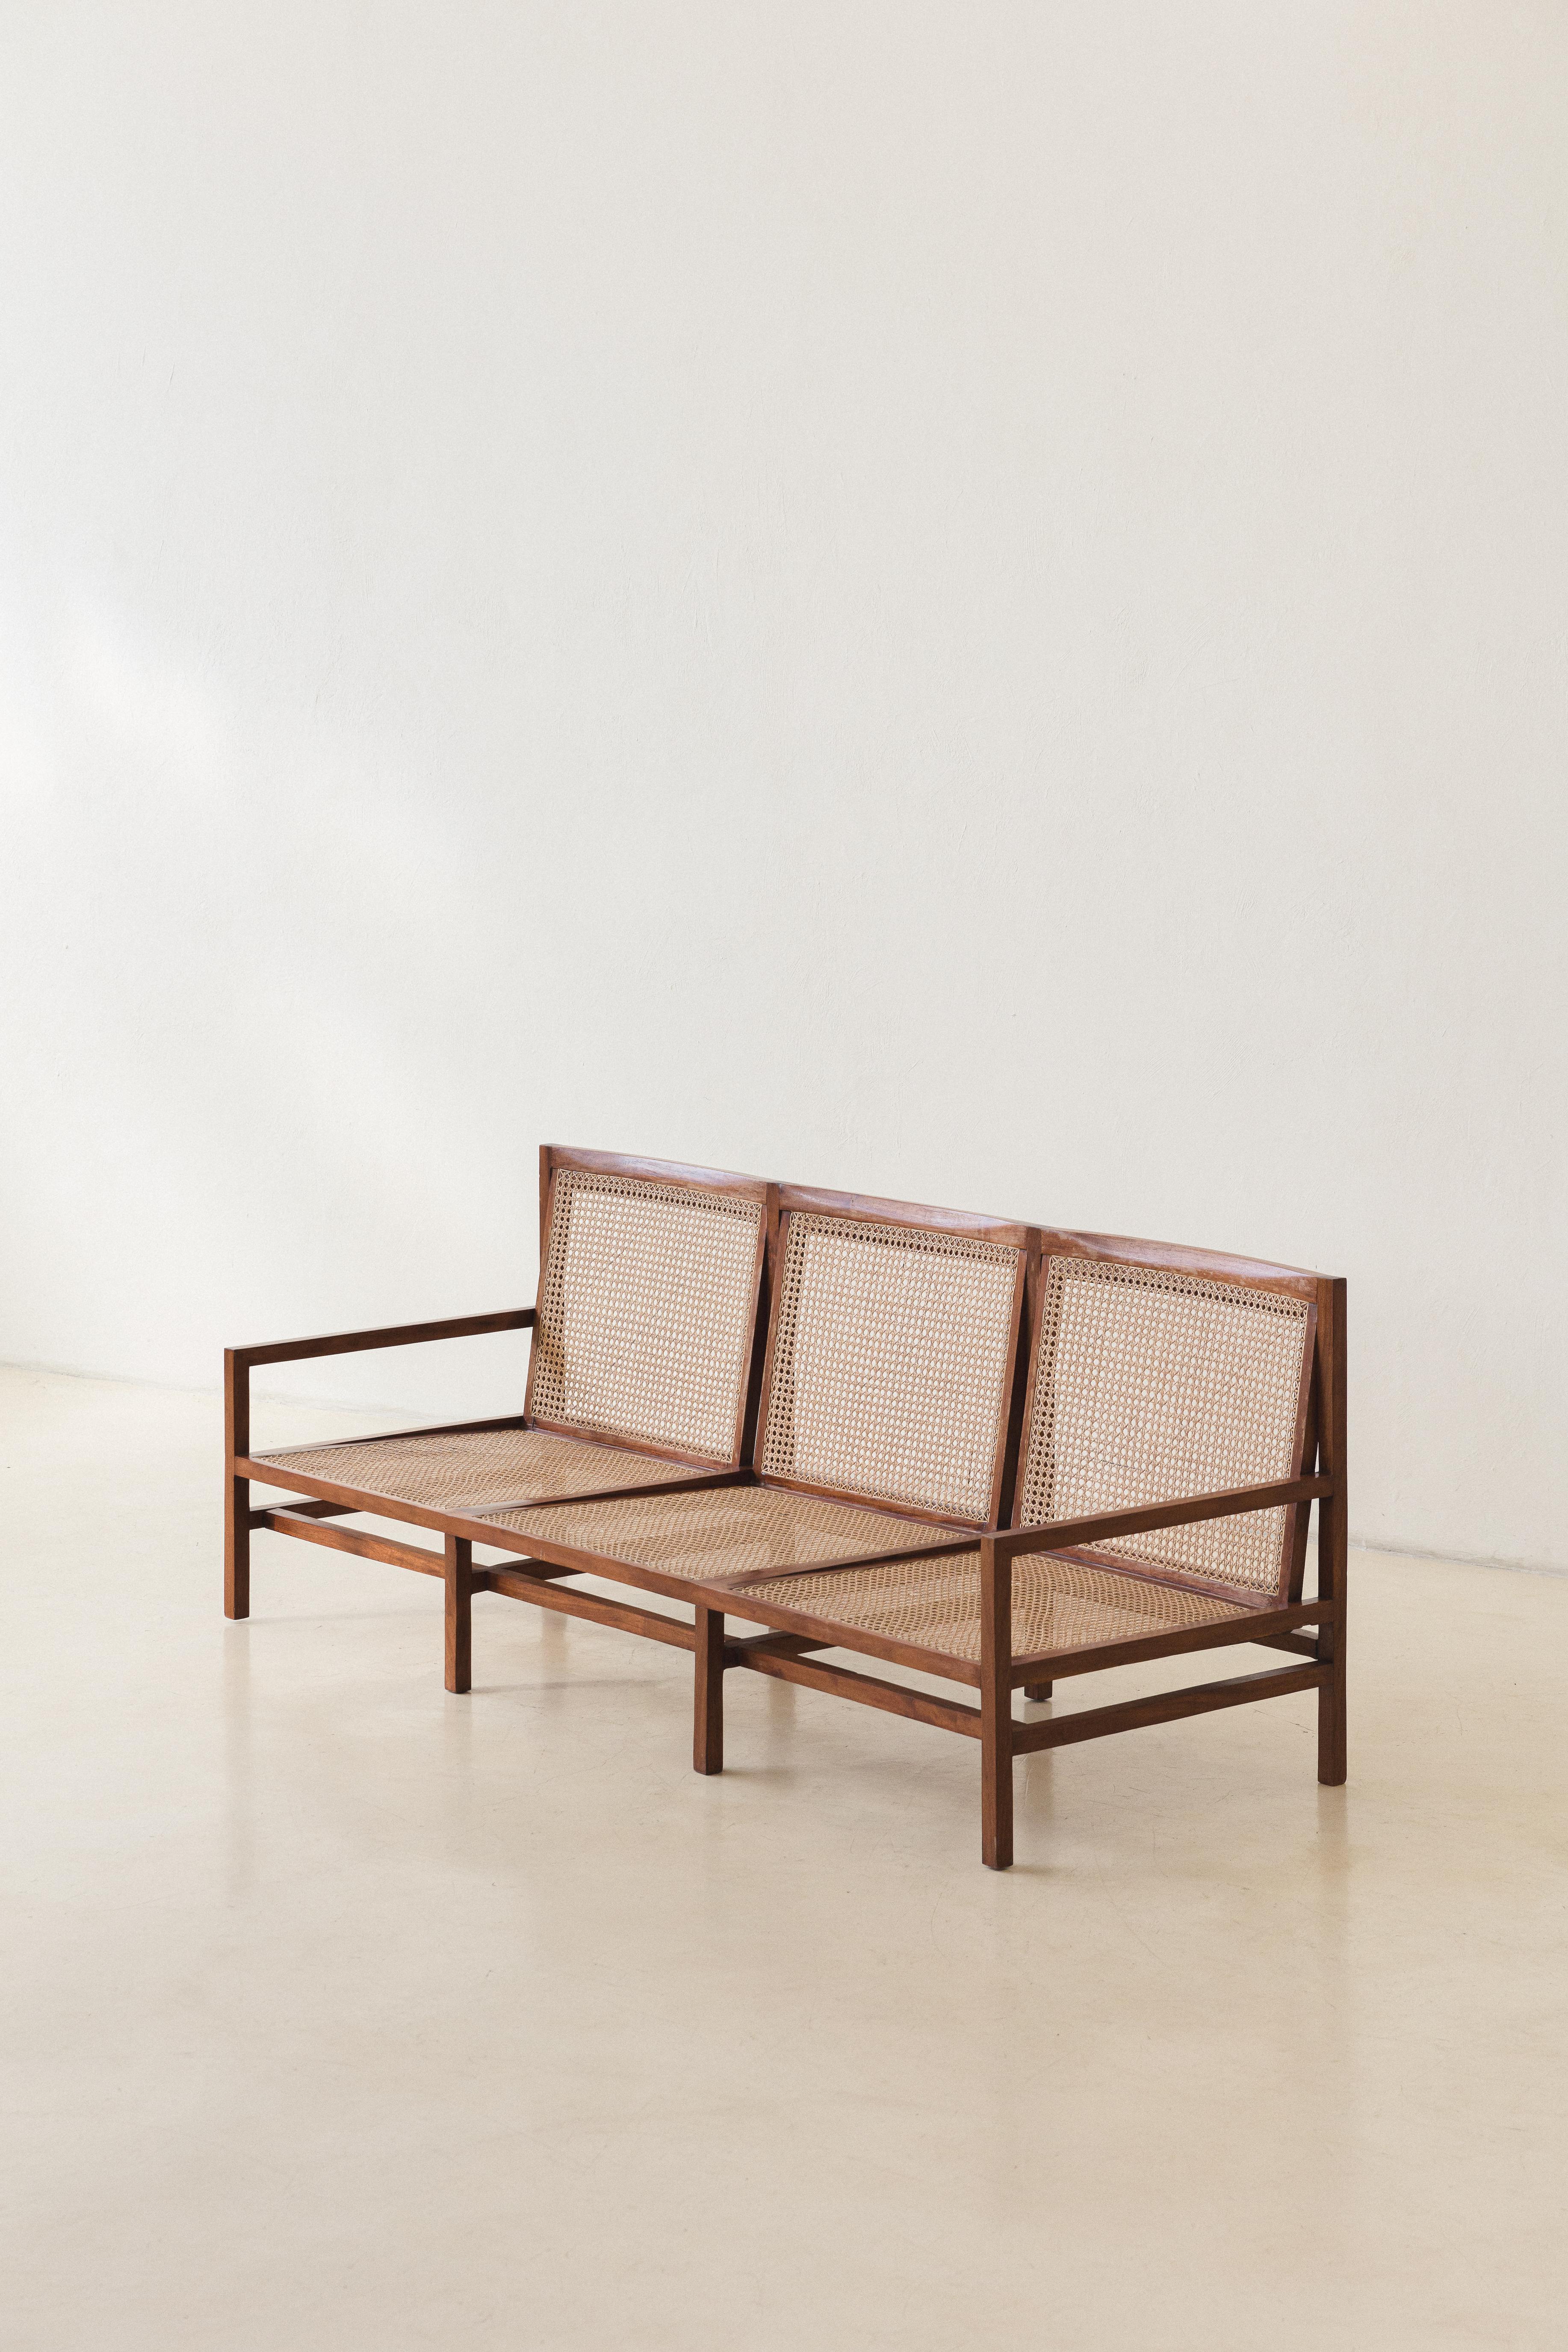 Joaquim Tenreiro (1906-1992) is known as the “father” of Brazilian modernism, being one of the pioneers, with a work that reflects a refined coexistence of traditional values and modern aesthetics. This living room set, composed of Cane Sofa and